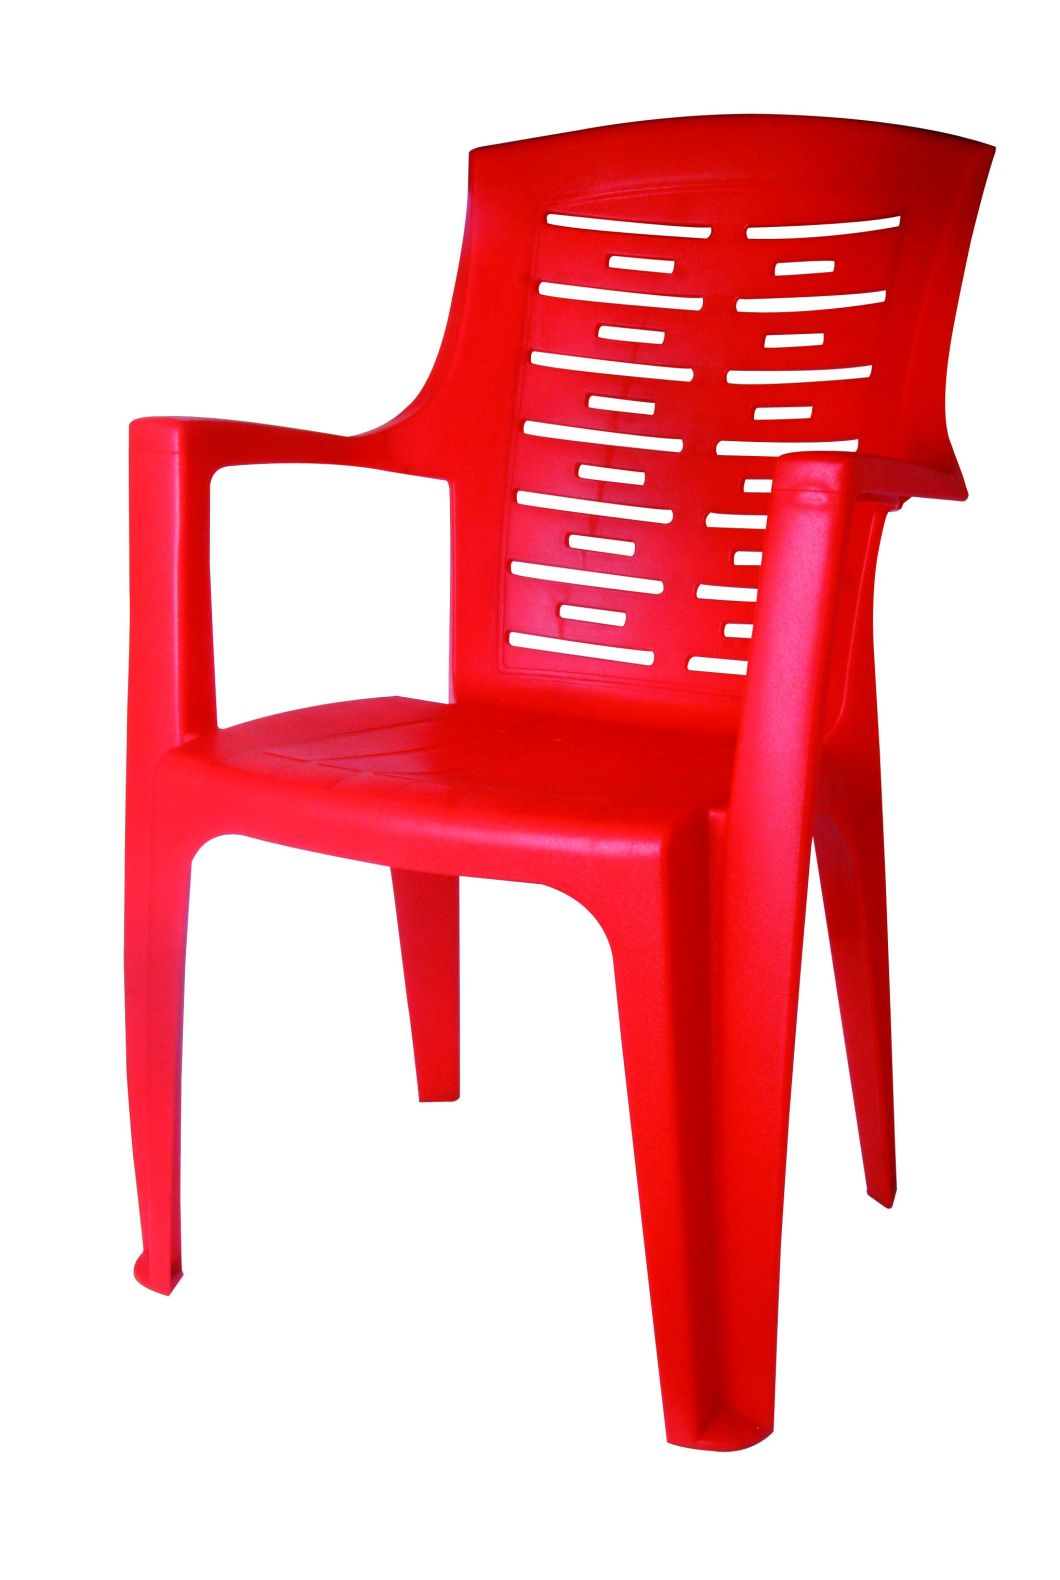 Plastic Injection Modern Furniture Chair Mold